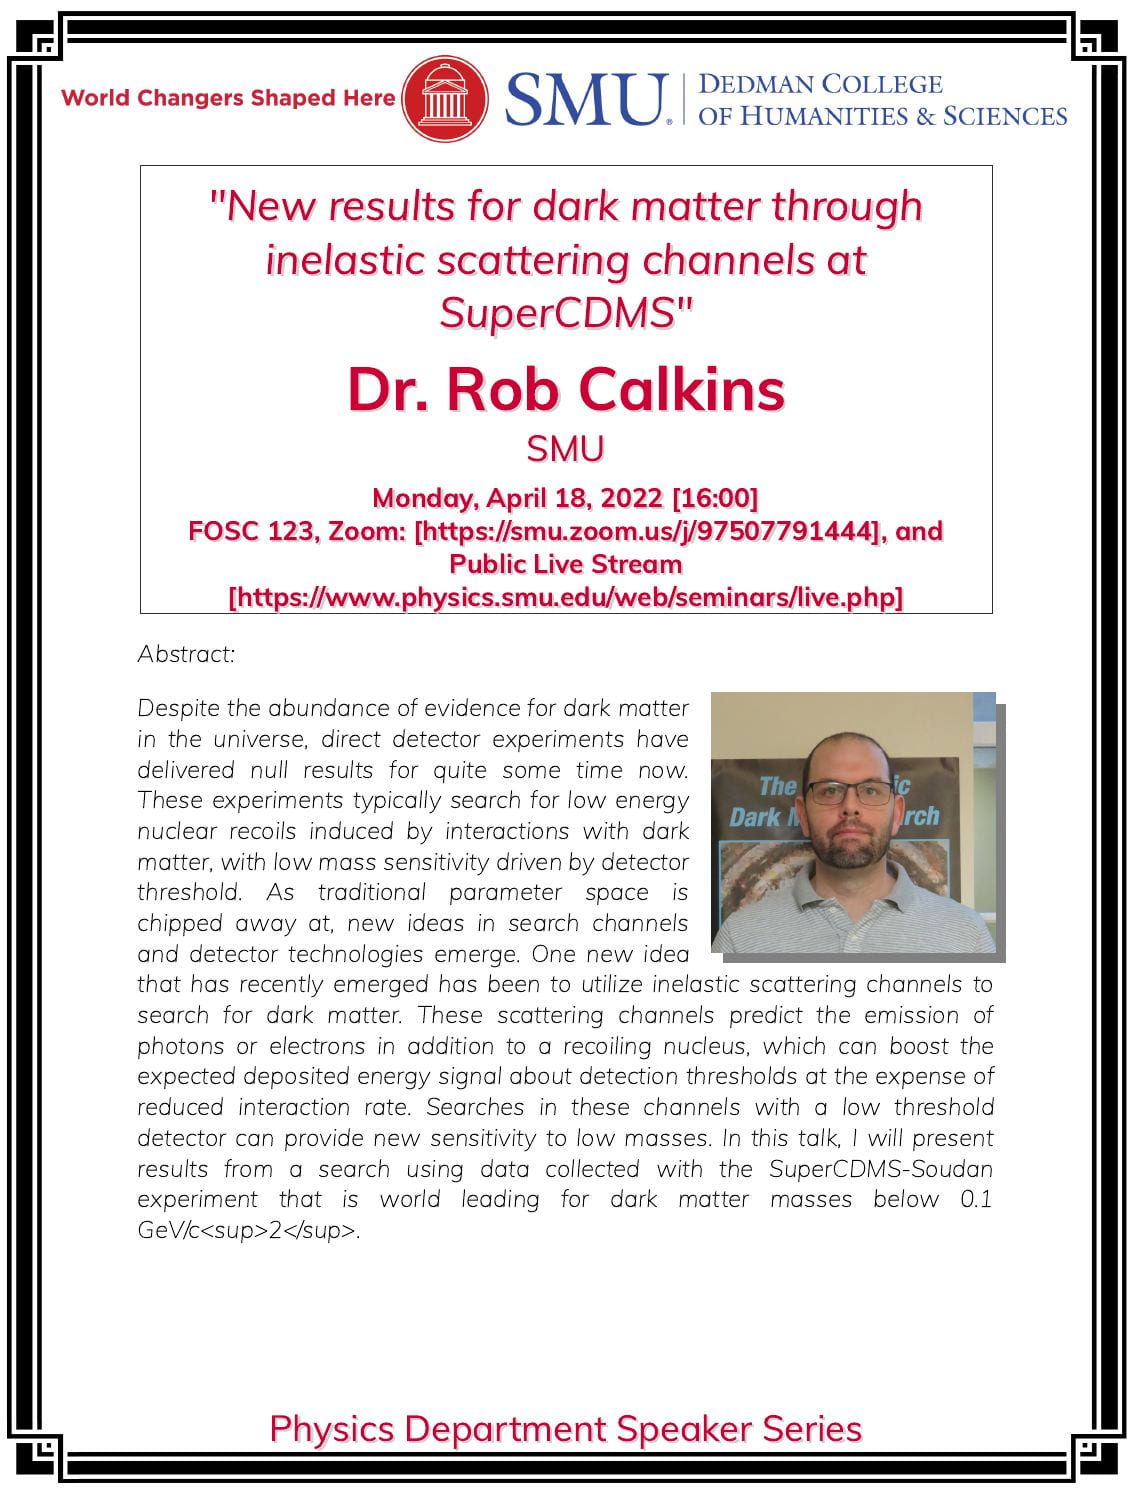 Department Speaker Series Continues with Dr. Rob Calkins (SMU)